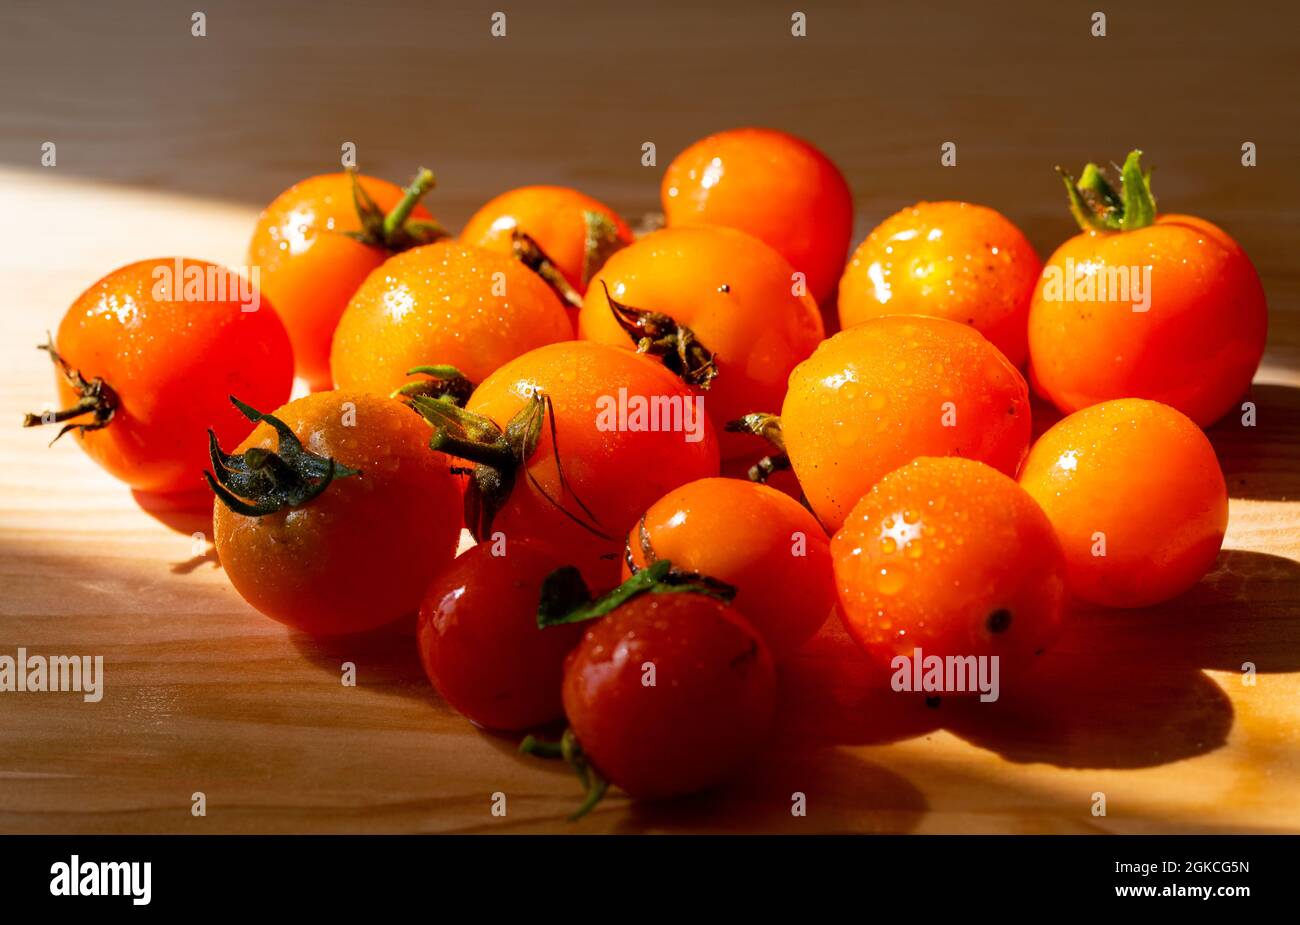 Fresh Tumbling Tom Tomatoes complete with their stalks and small droplets of water on a wooden chopping board Stock Photo